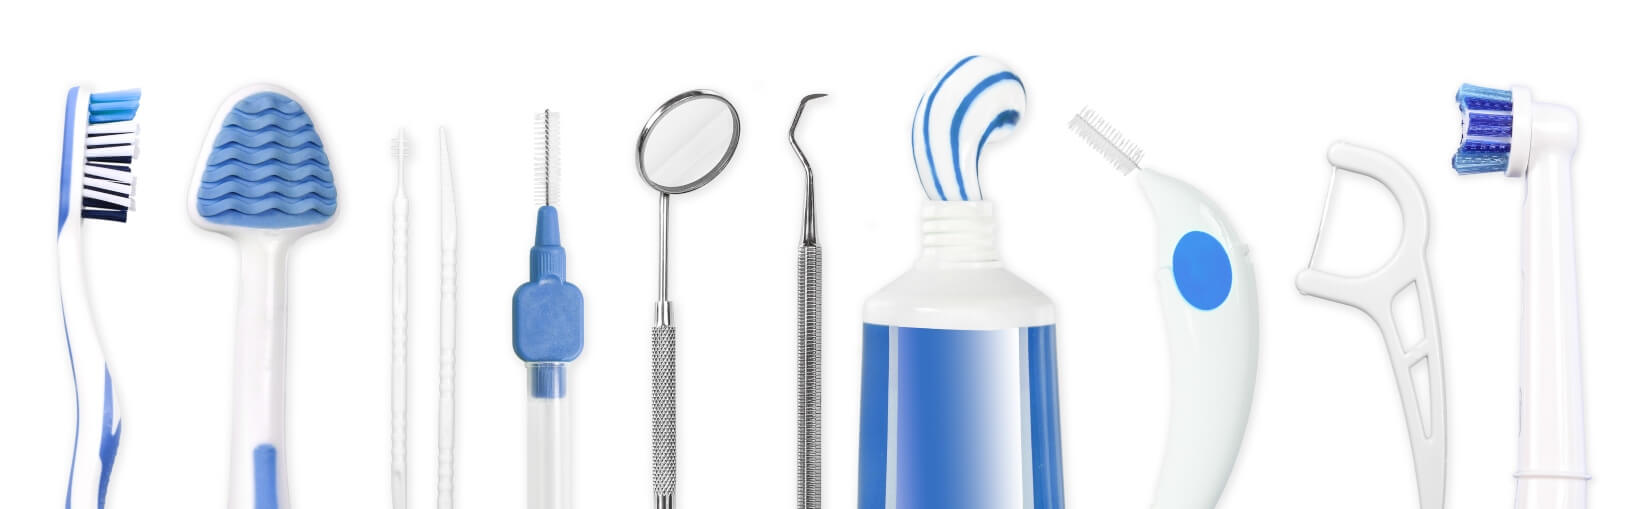 blue and white dental tools lined up. toothbrush, floss, pick, mirror, toothpaste